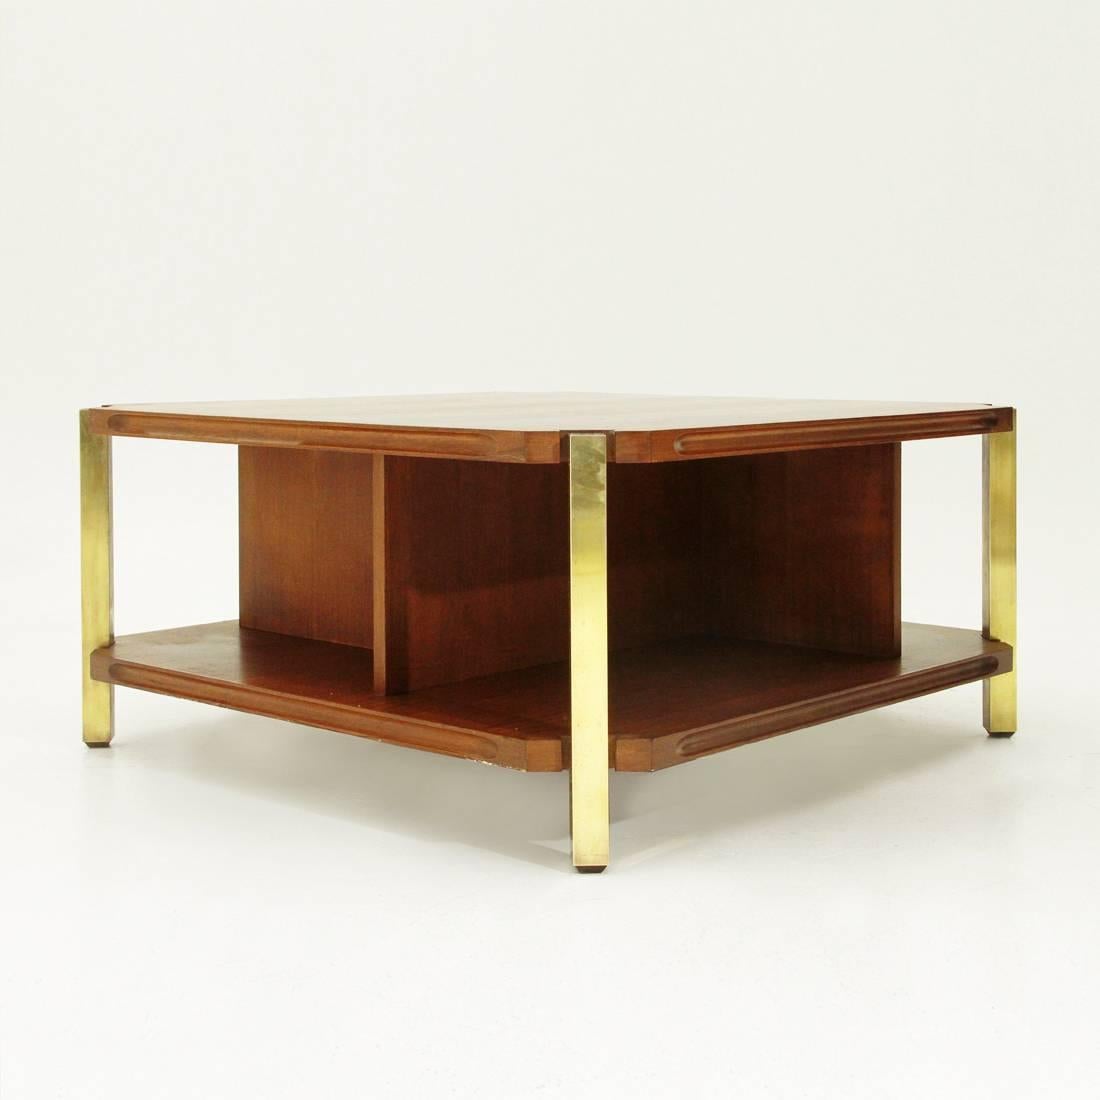 Coffee table of Italian manufacture produced in the 1960s.
Teak veneered wood structure.
Square-shaped tops with cut corners.
Borders with lateral recesses.
Partition walls between the two floors.
Wooden legs lined in brass.
Good general